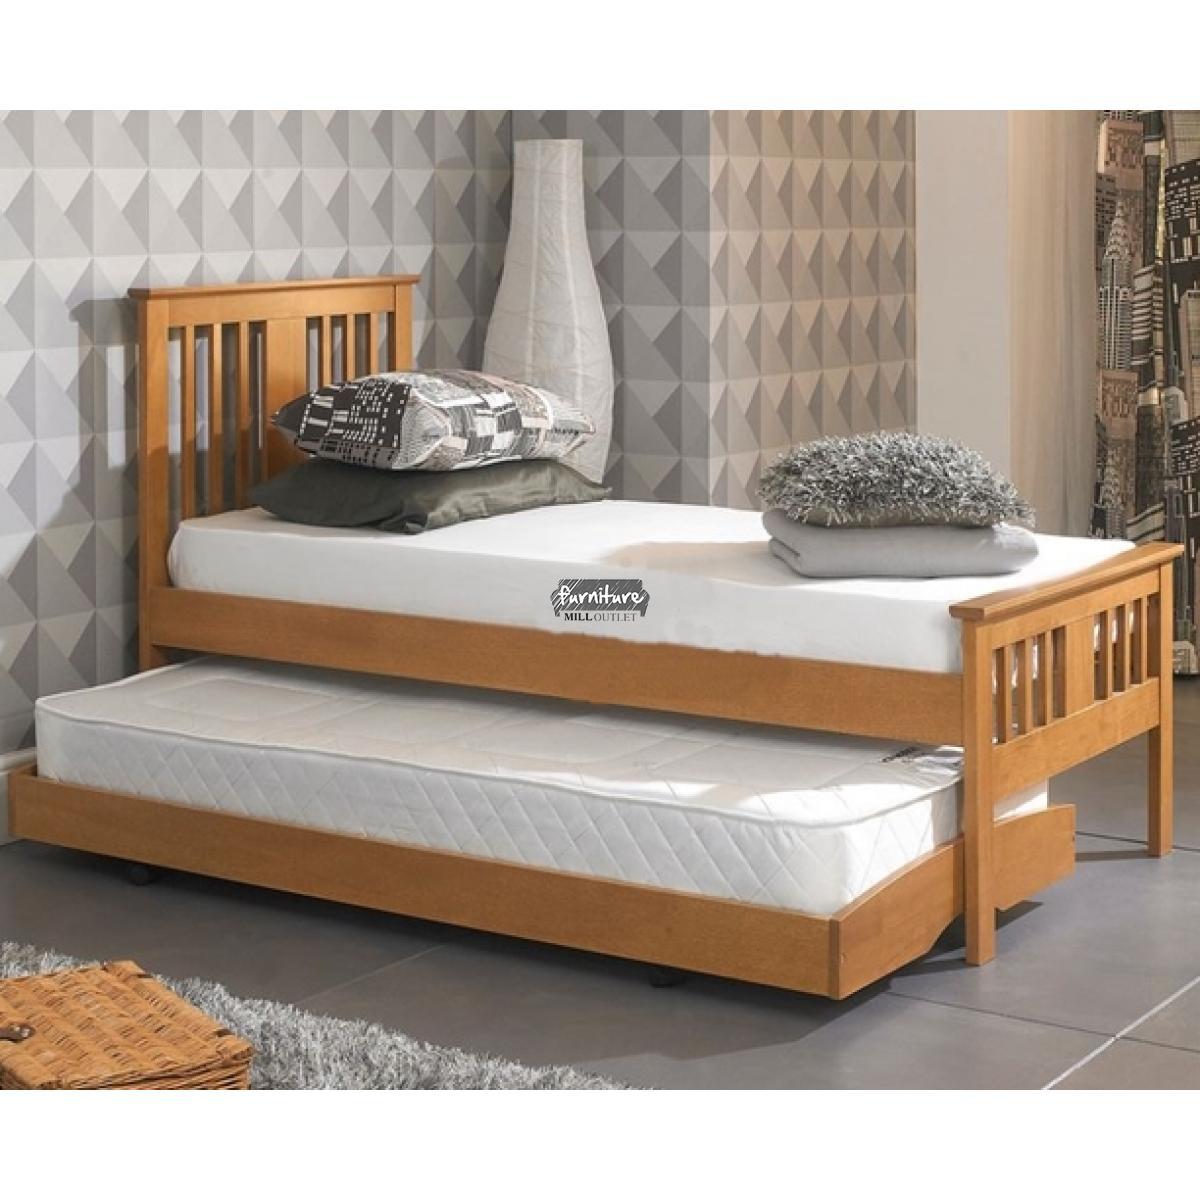 oak-hardwood-guest-bed-with-trundle2